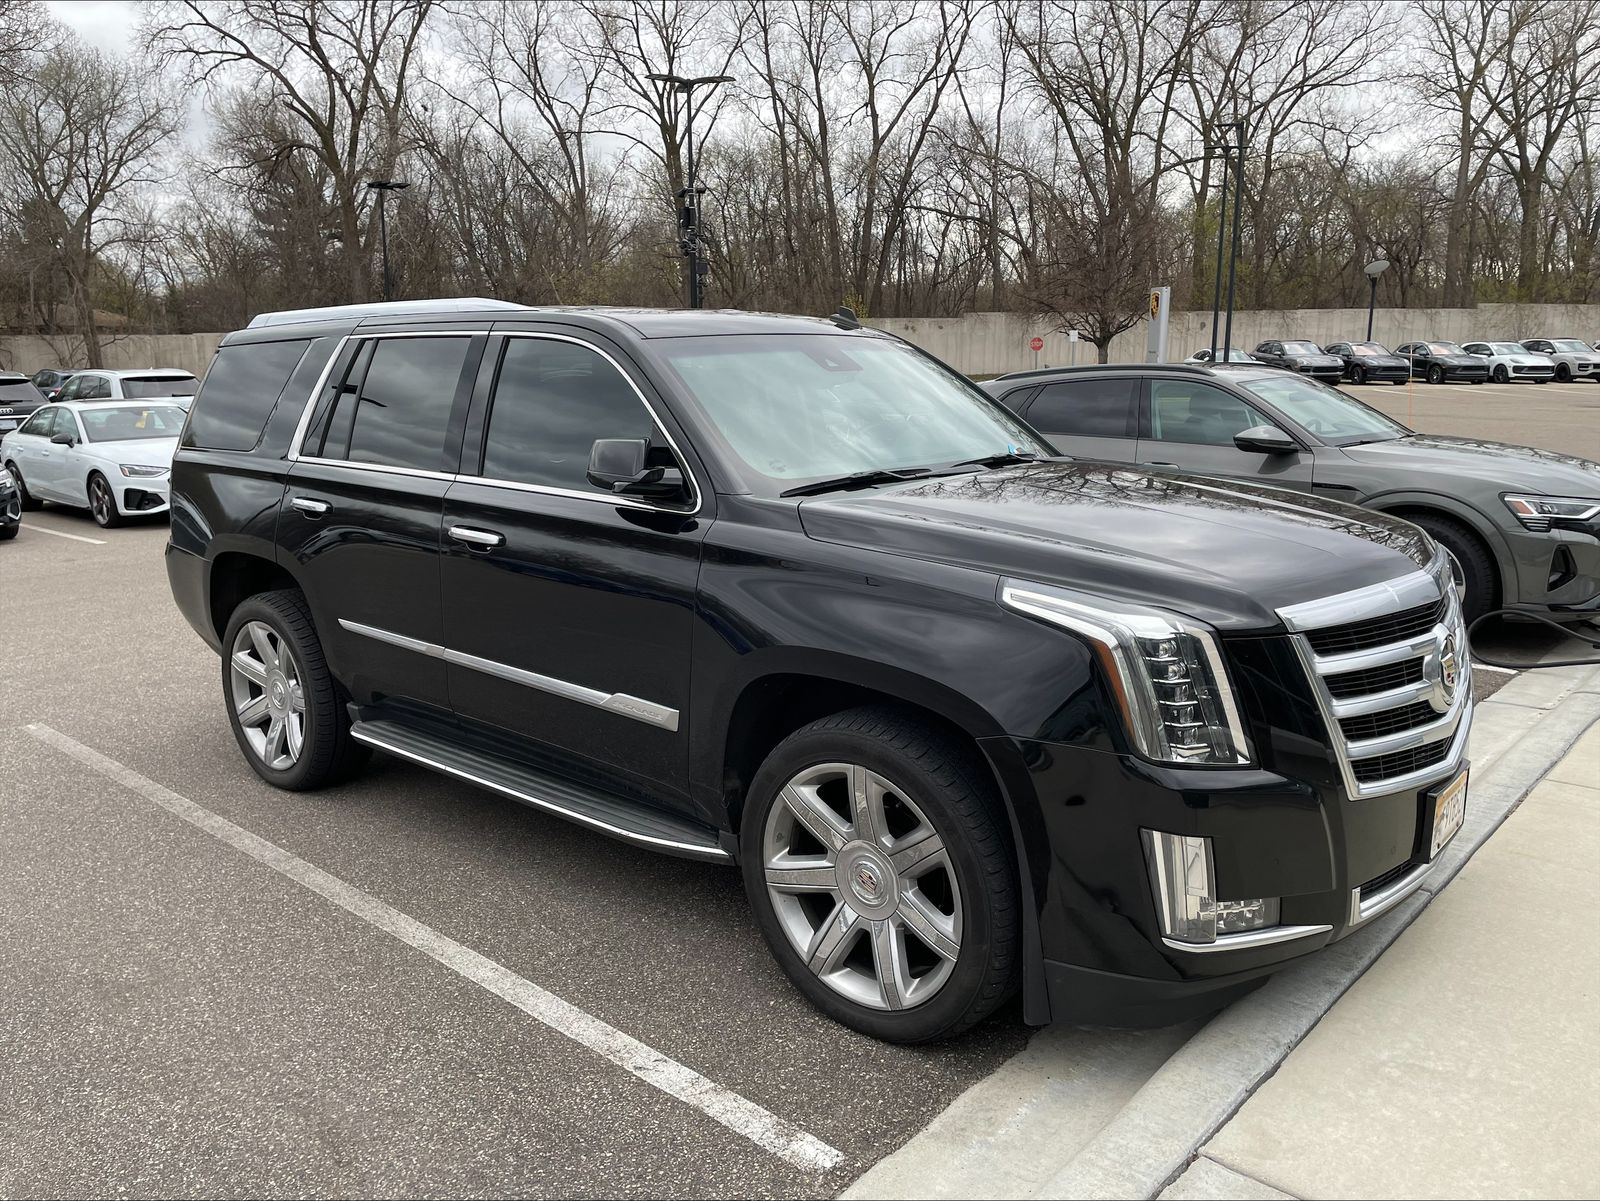 Used 2015 Cadillac Escalade Luxury with VIN 1GYS4BKJ0FR301462 for sale in Minneapolis, Minnesota